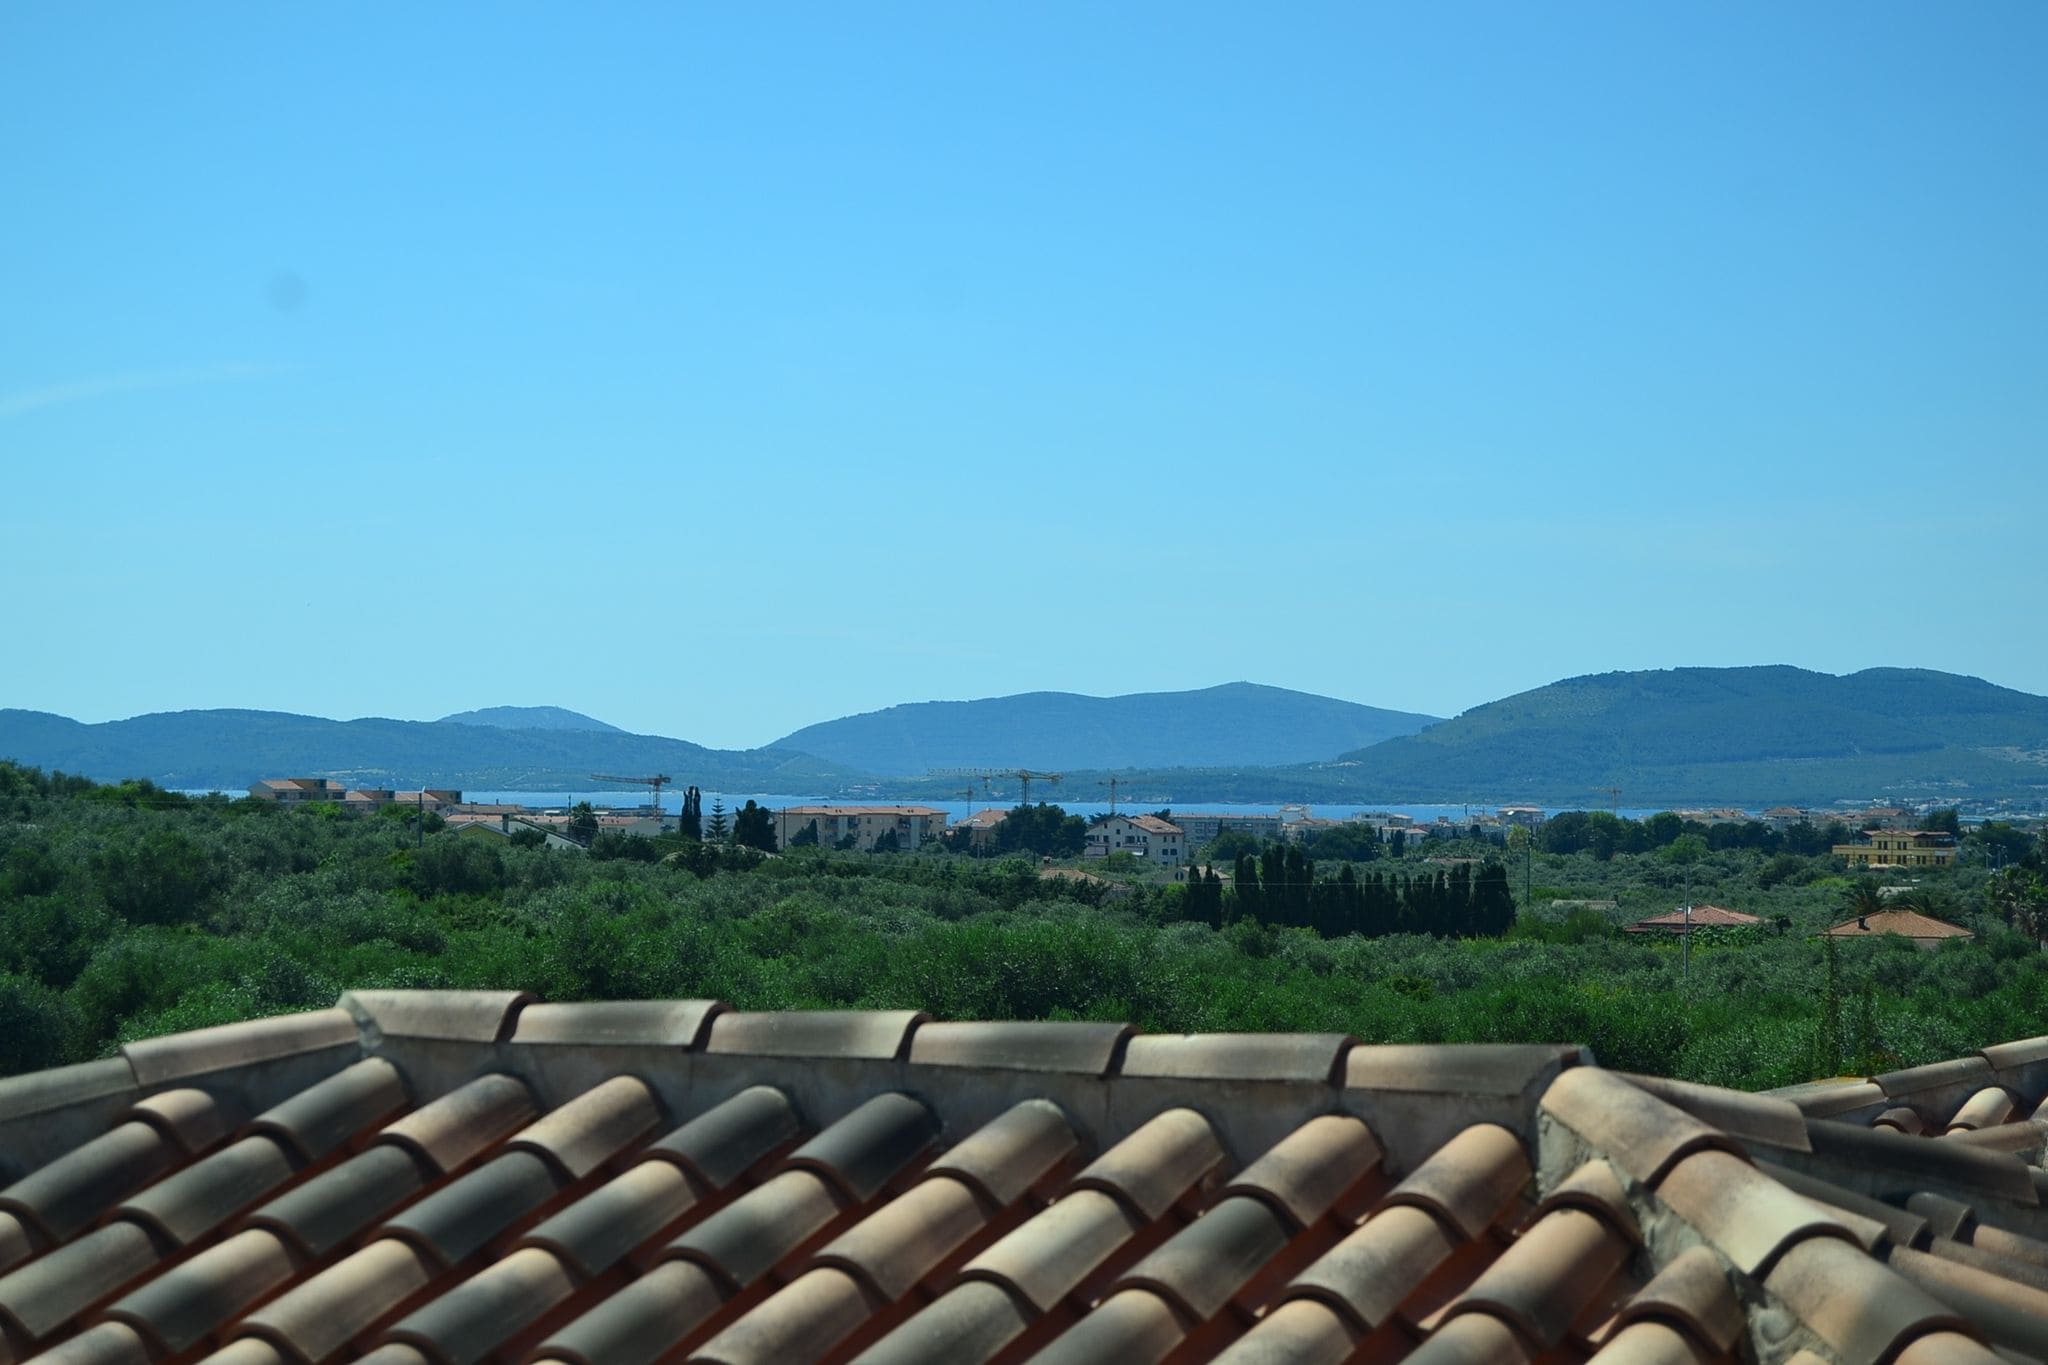 Villa with a panoramic swimming pool, 2 km from Alghero